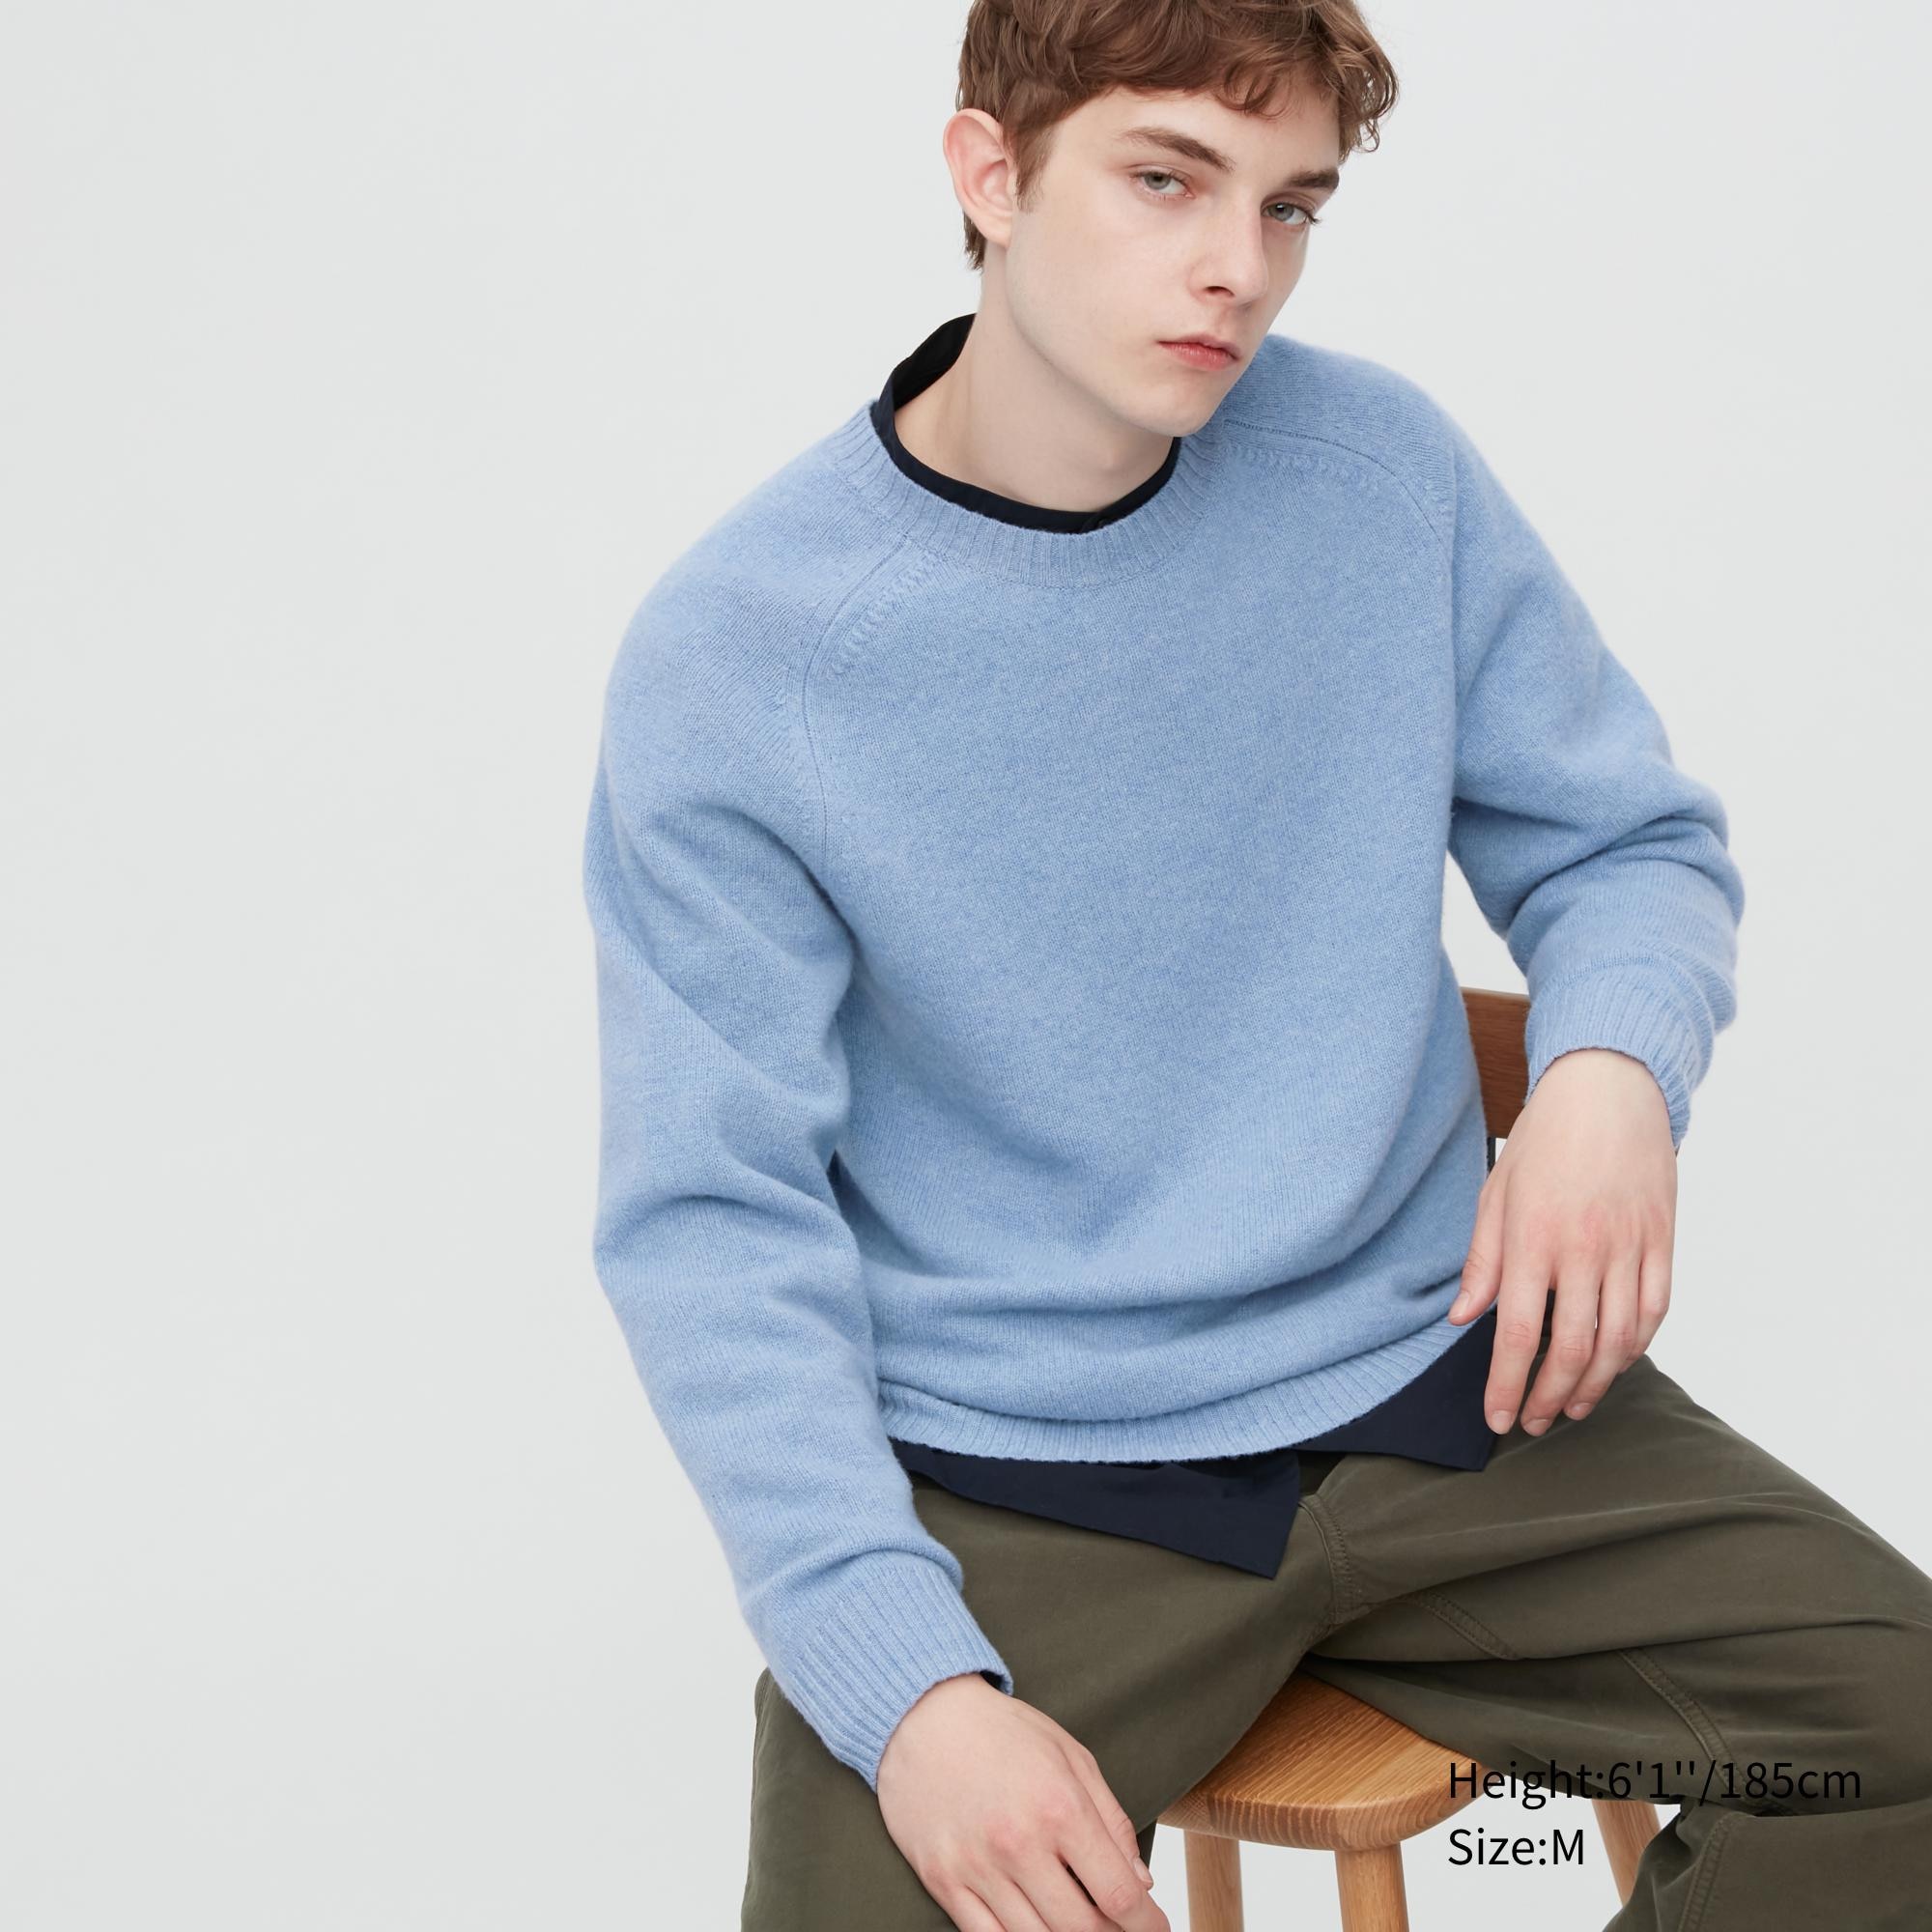 Best cashmere jumpers for men 2022 Uniqlo Zara Everlane and more   Evening Standard